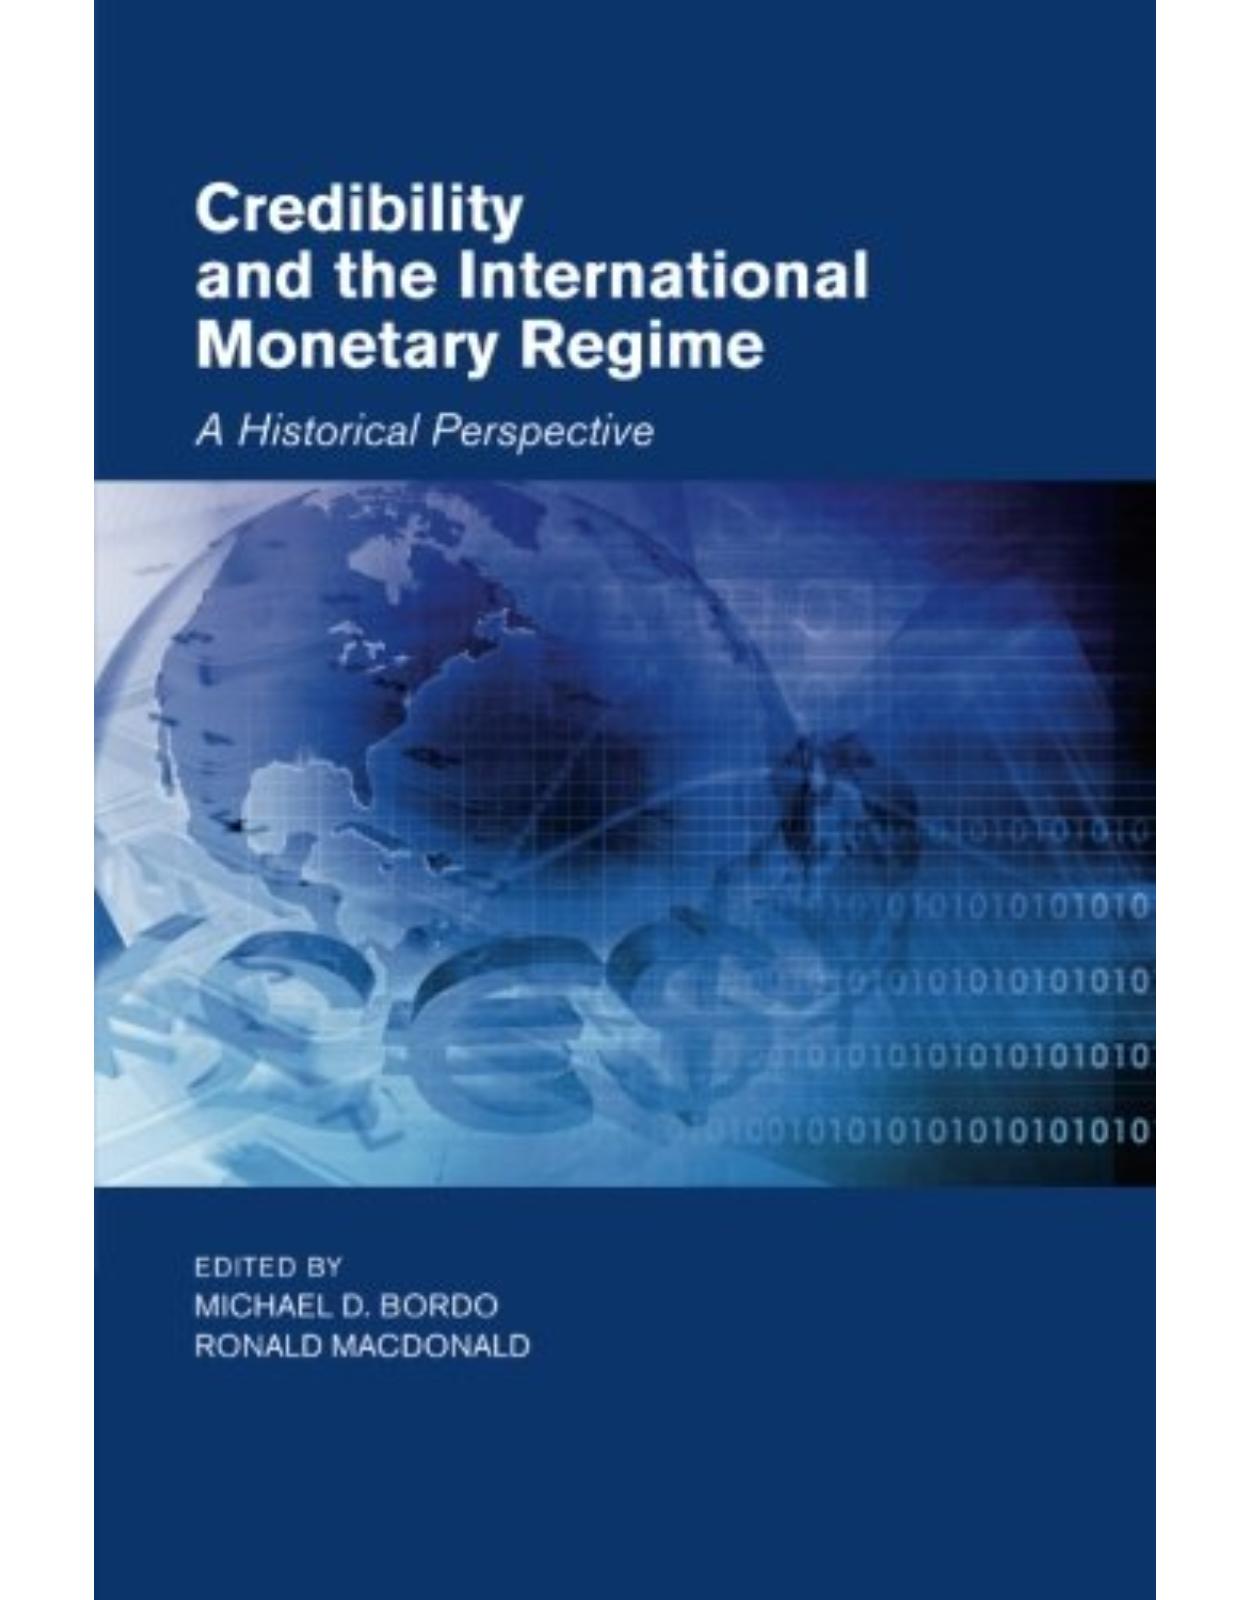 Credibility and the International Monetary Regime: A Historical Perspective (Studies in Macroeconomic History)